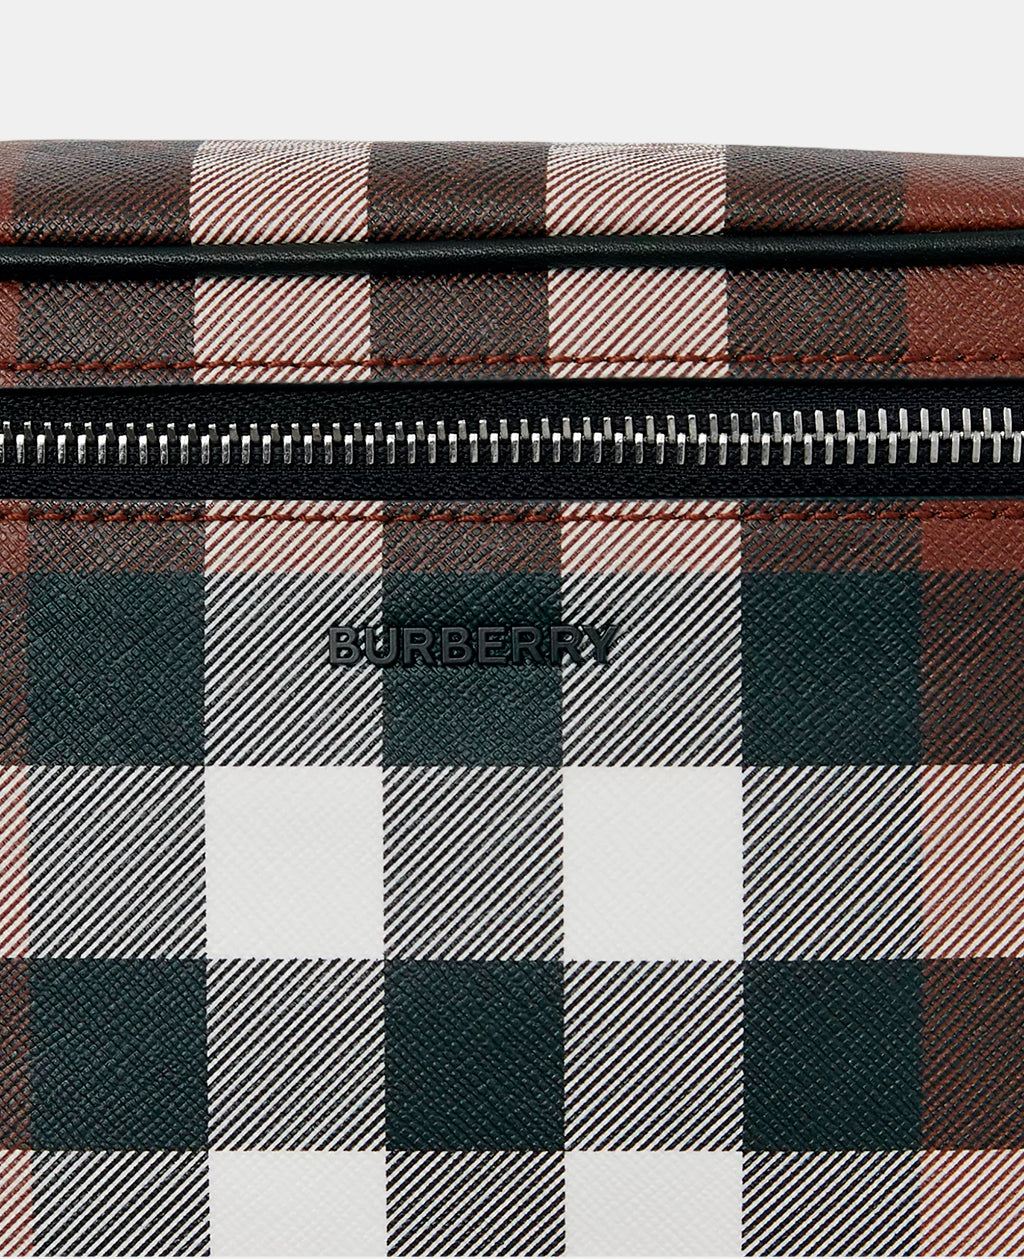 BURBERRY - Check and Leather Bum Bag - Men - Dark-Birch-Brown – LABELL-D